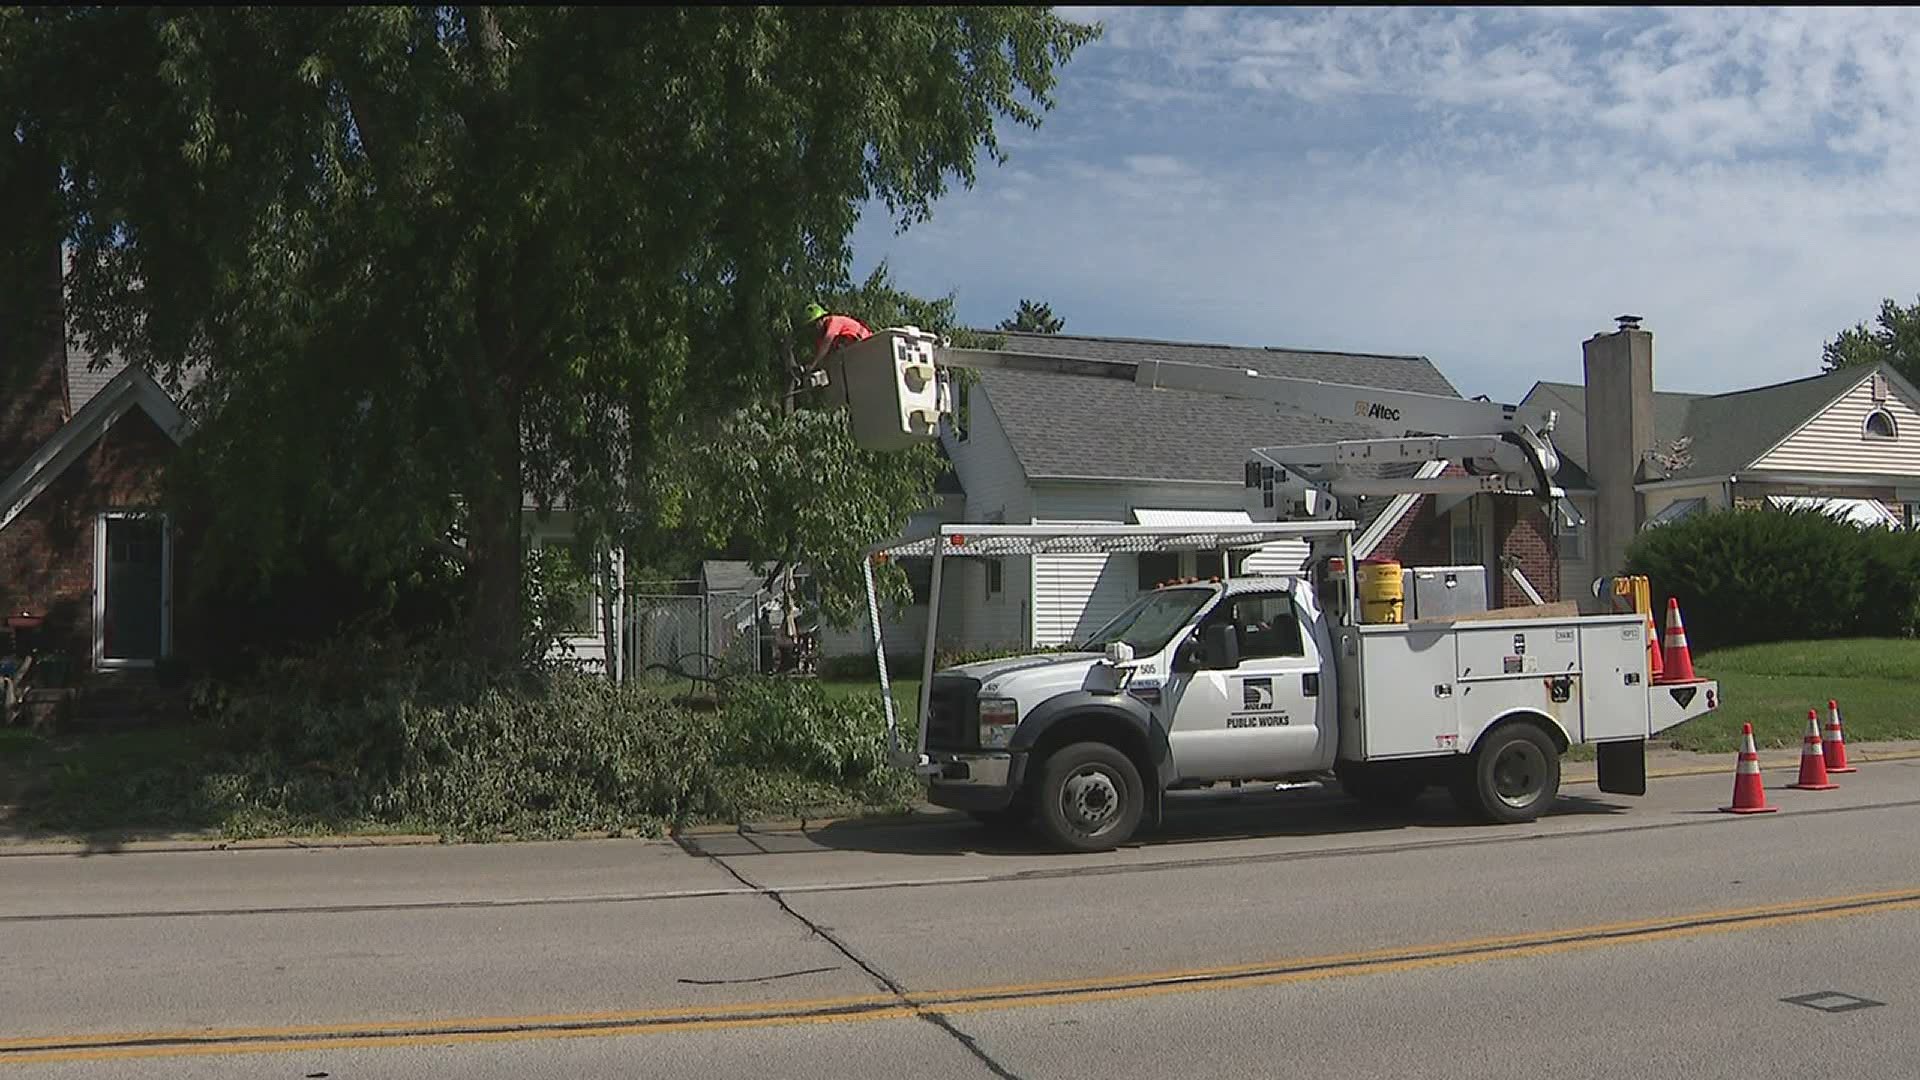 Recovery from severe storms may take a long time in the QC